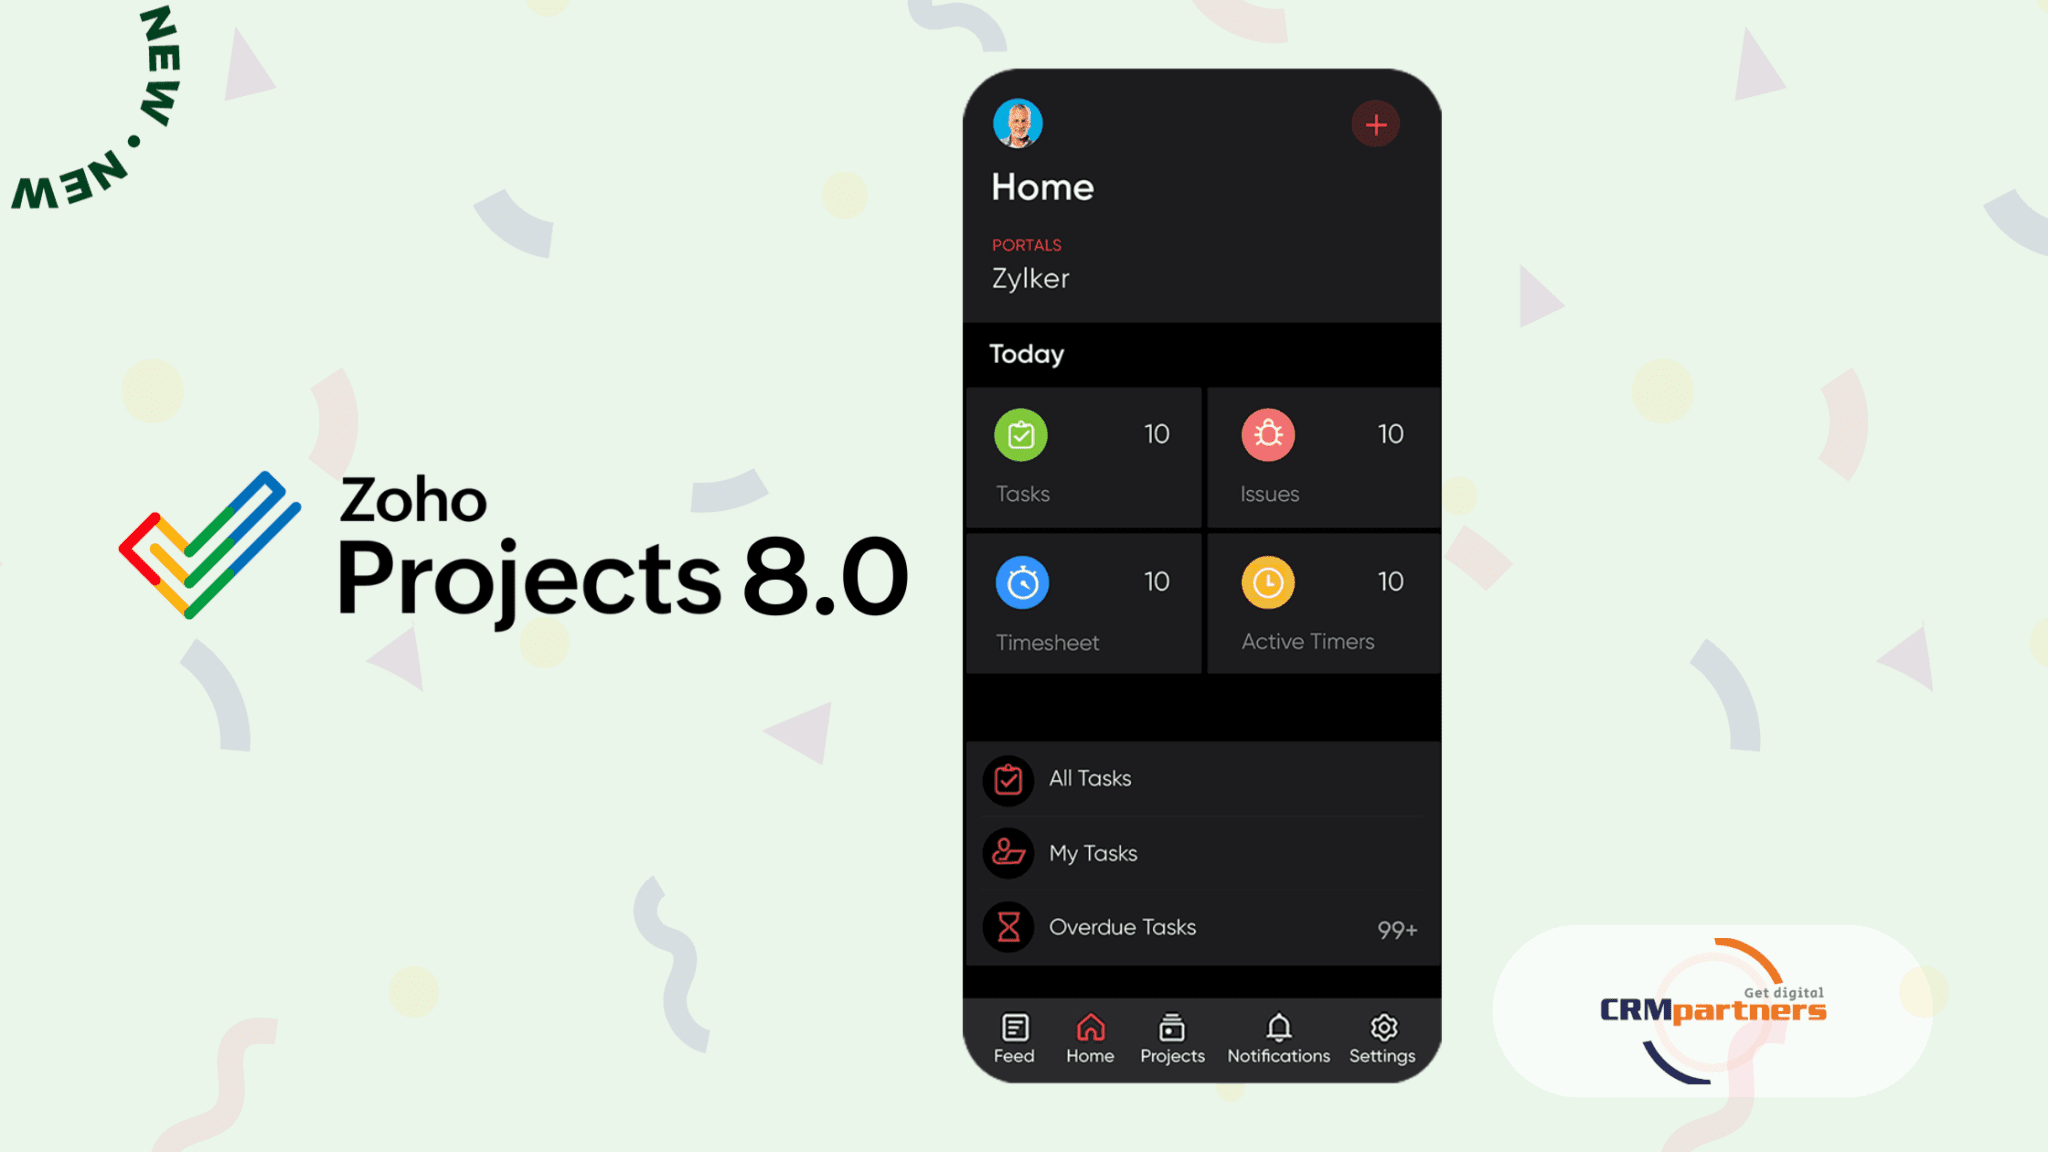 Zoho projects 8.0